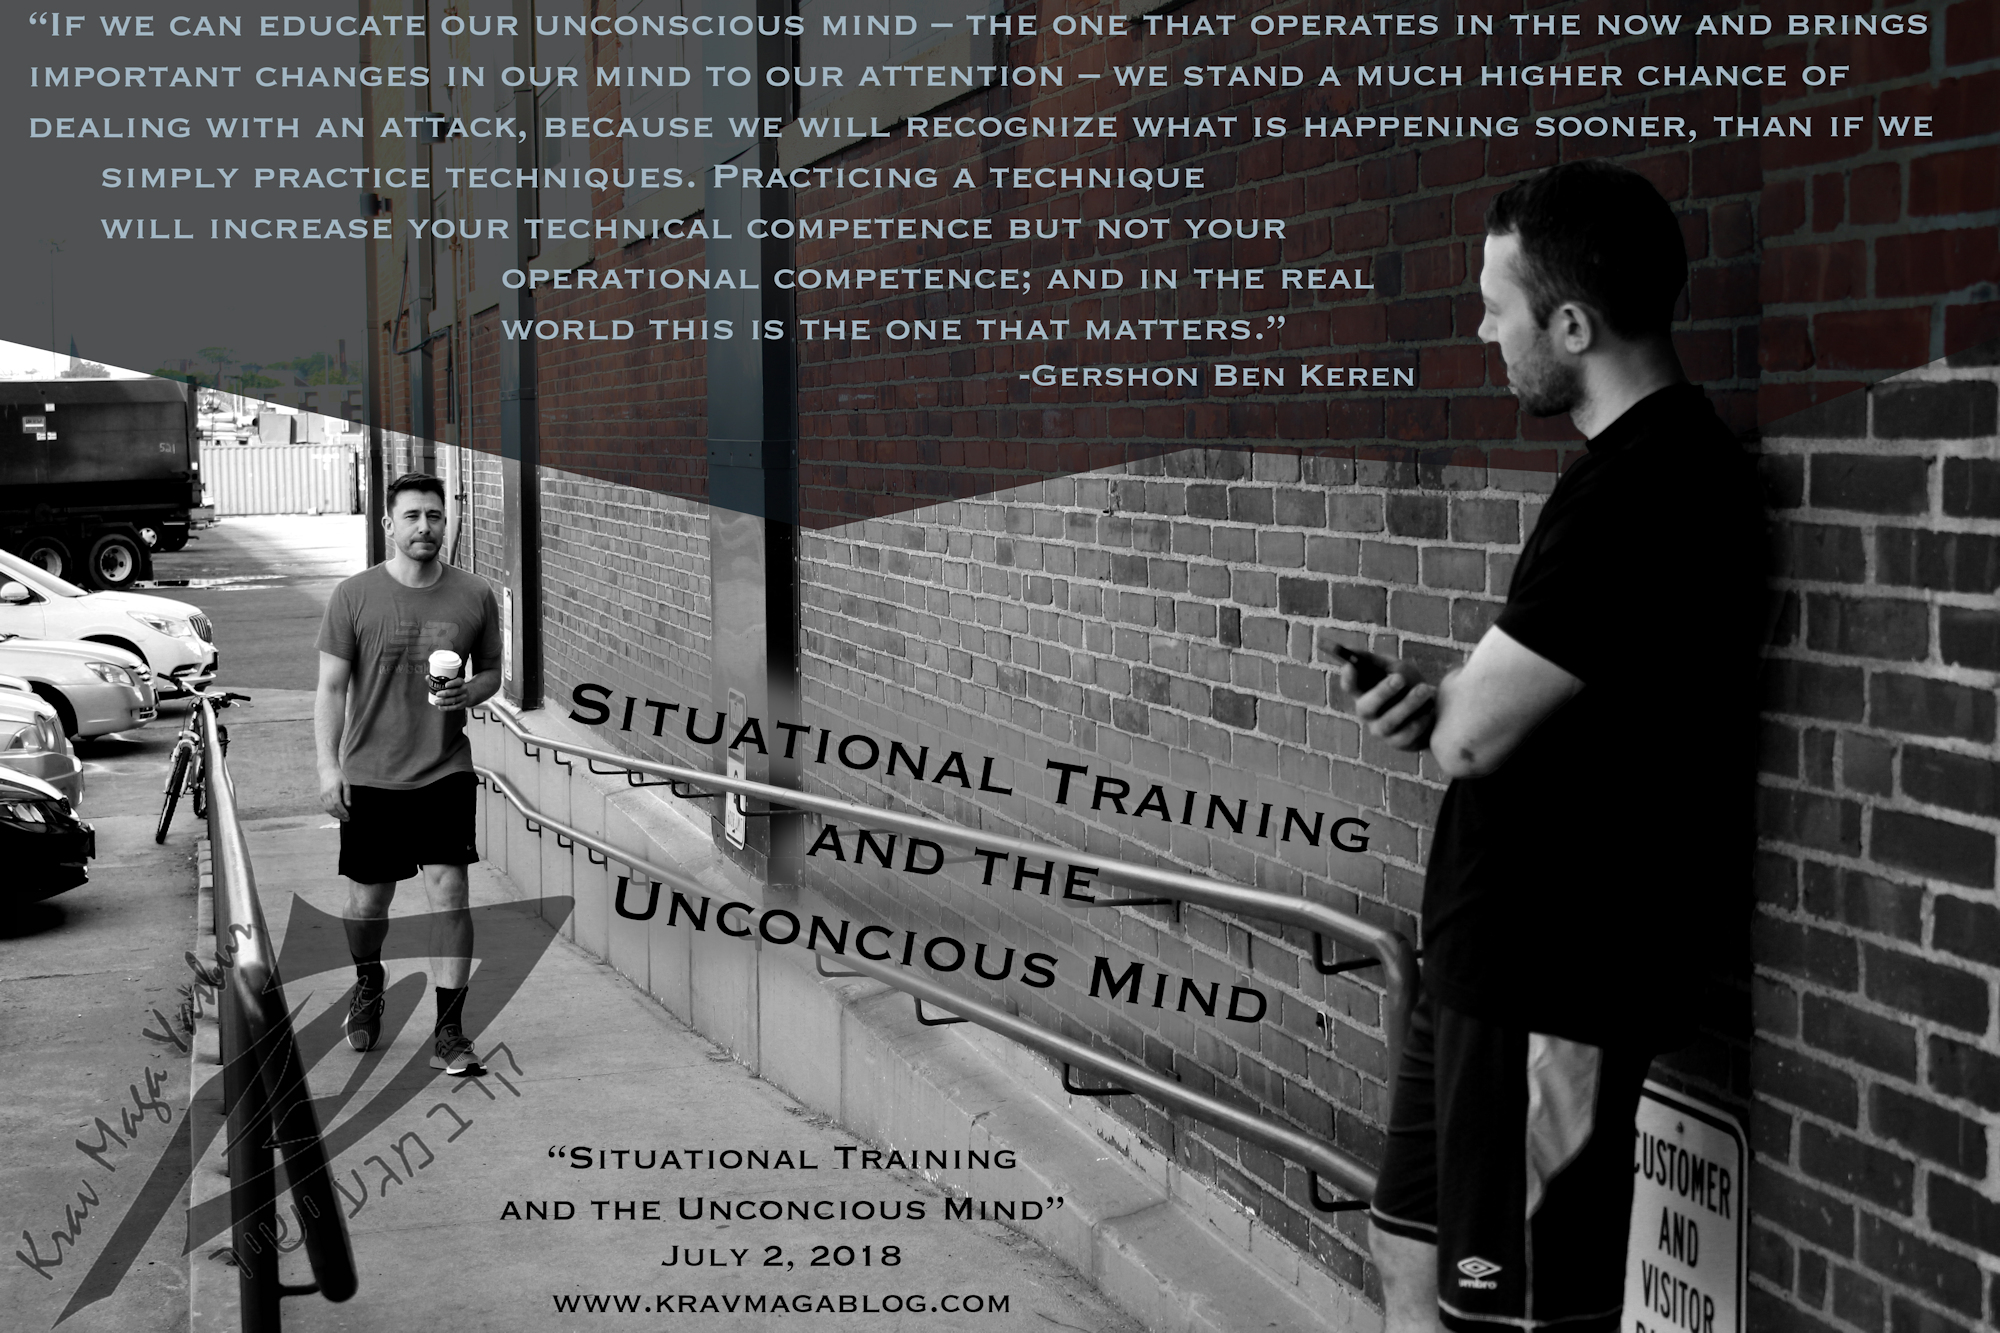 Blog About Situational Training & The Unconscious Mind